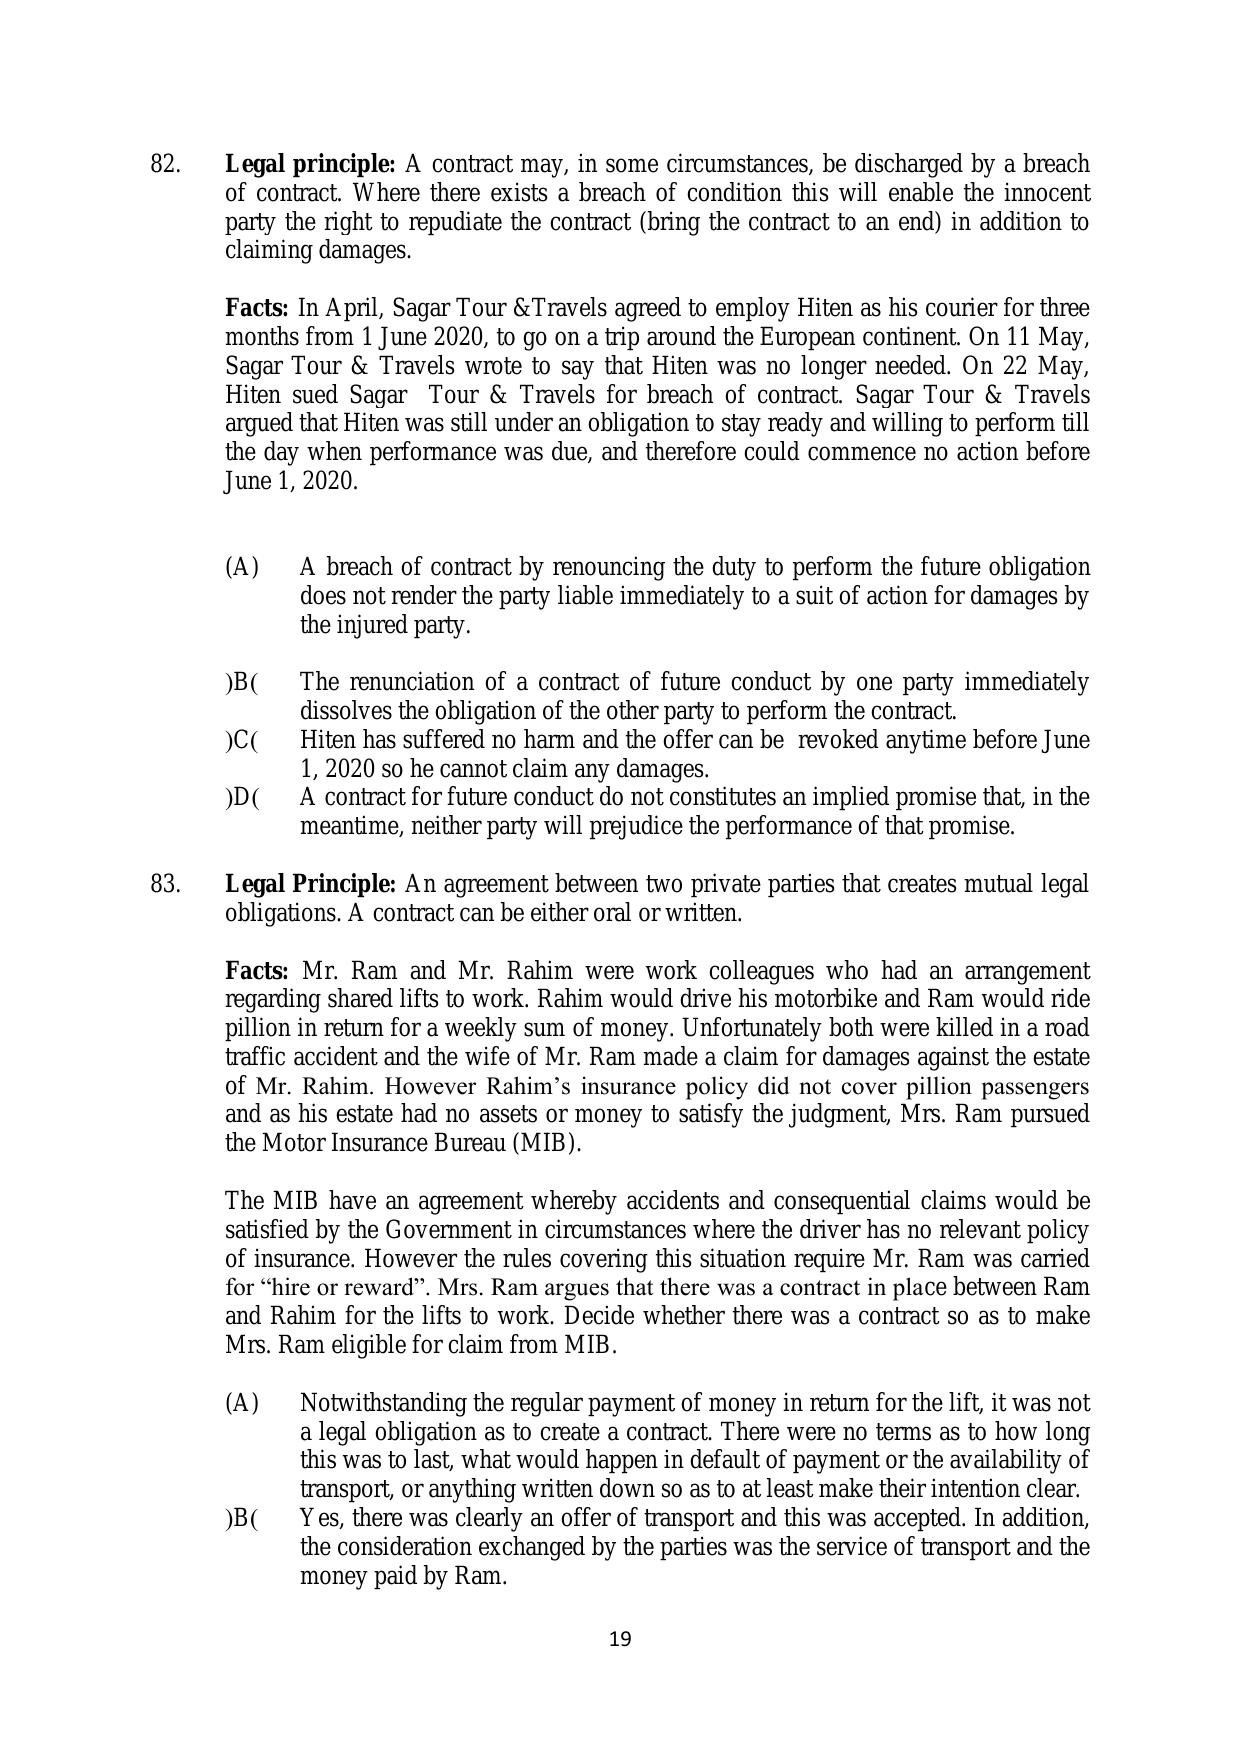 AILET 2020 Question Paper for BA LLB - Page 19